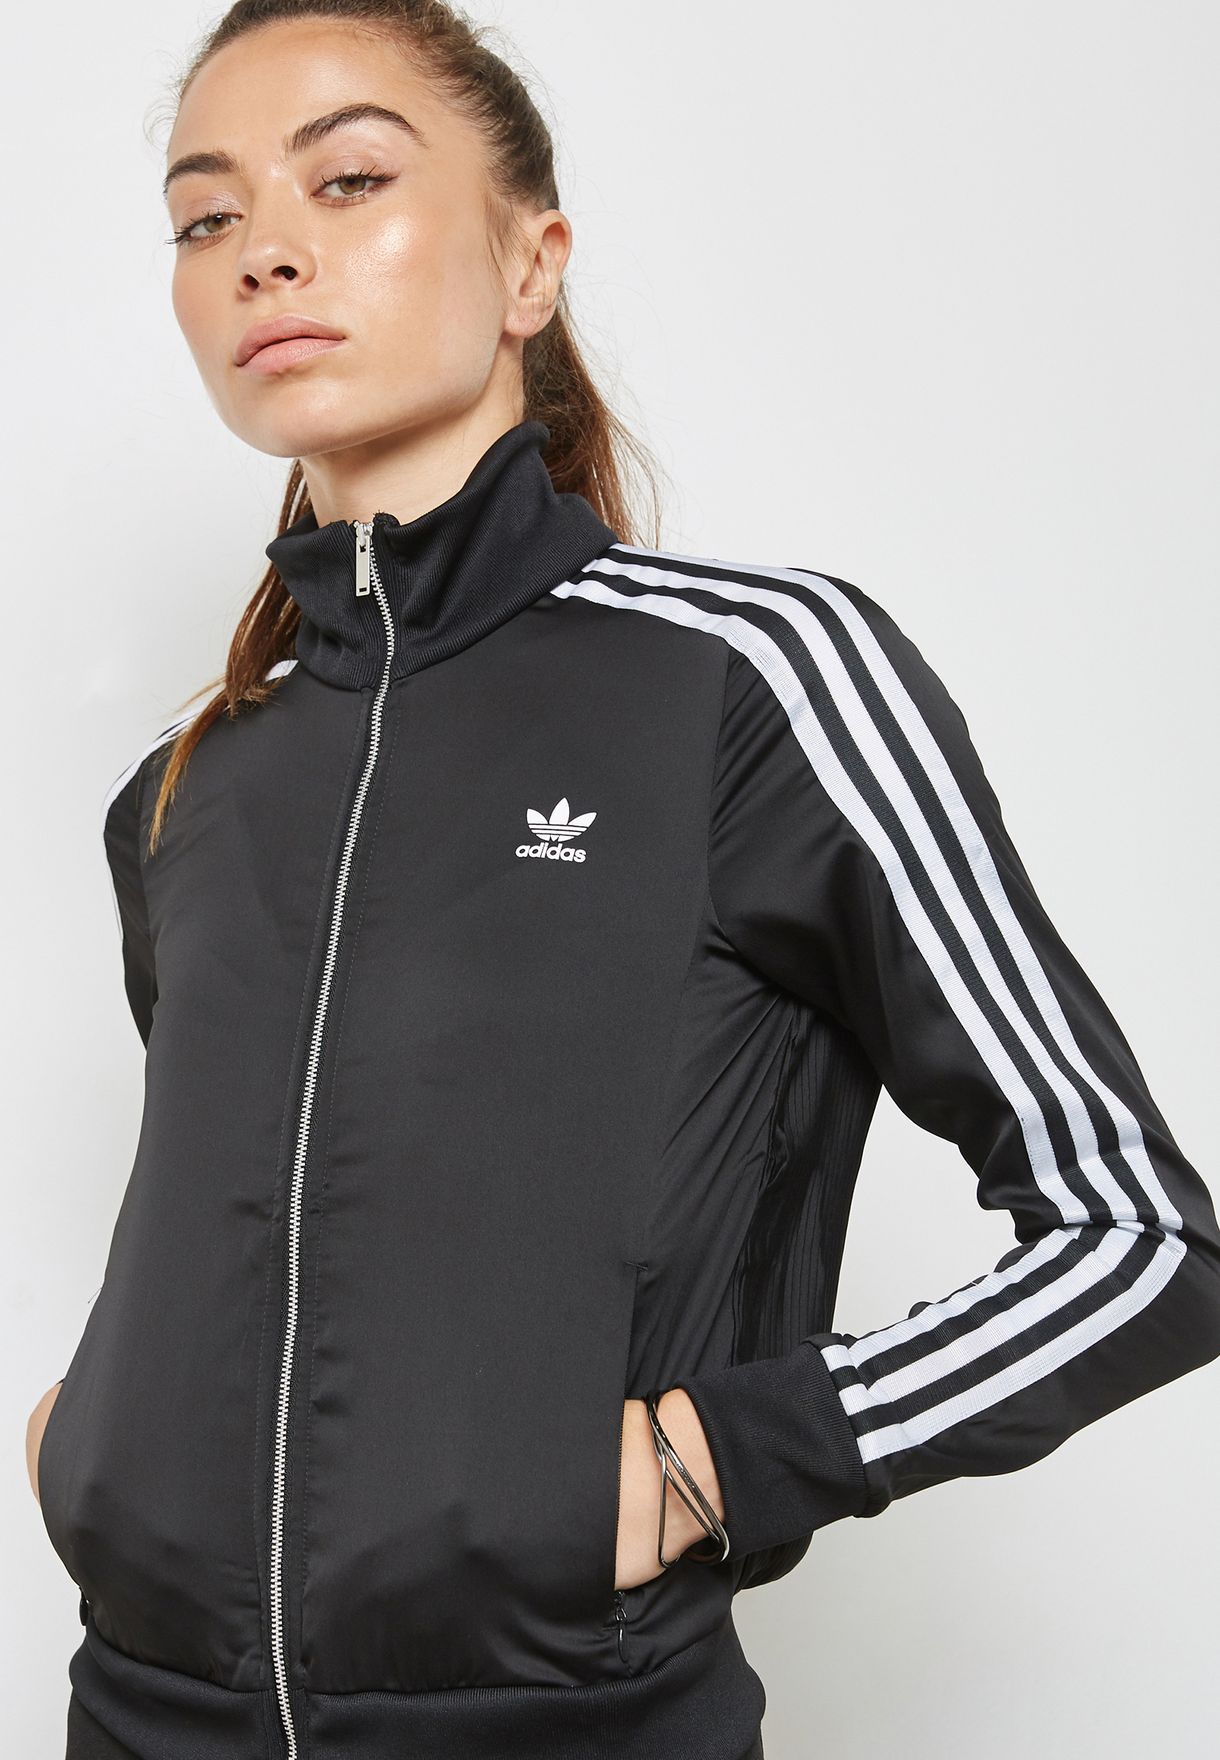 adidas europa black and red track top